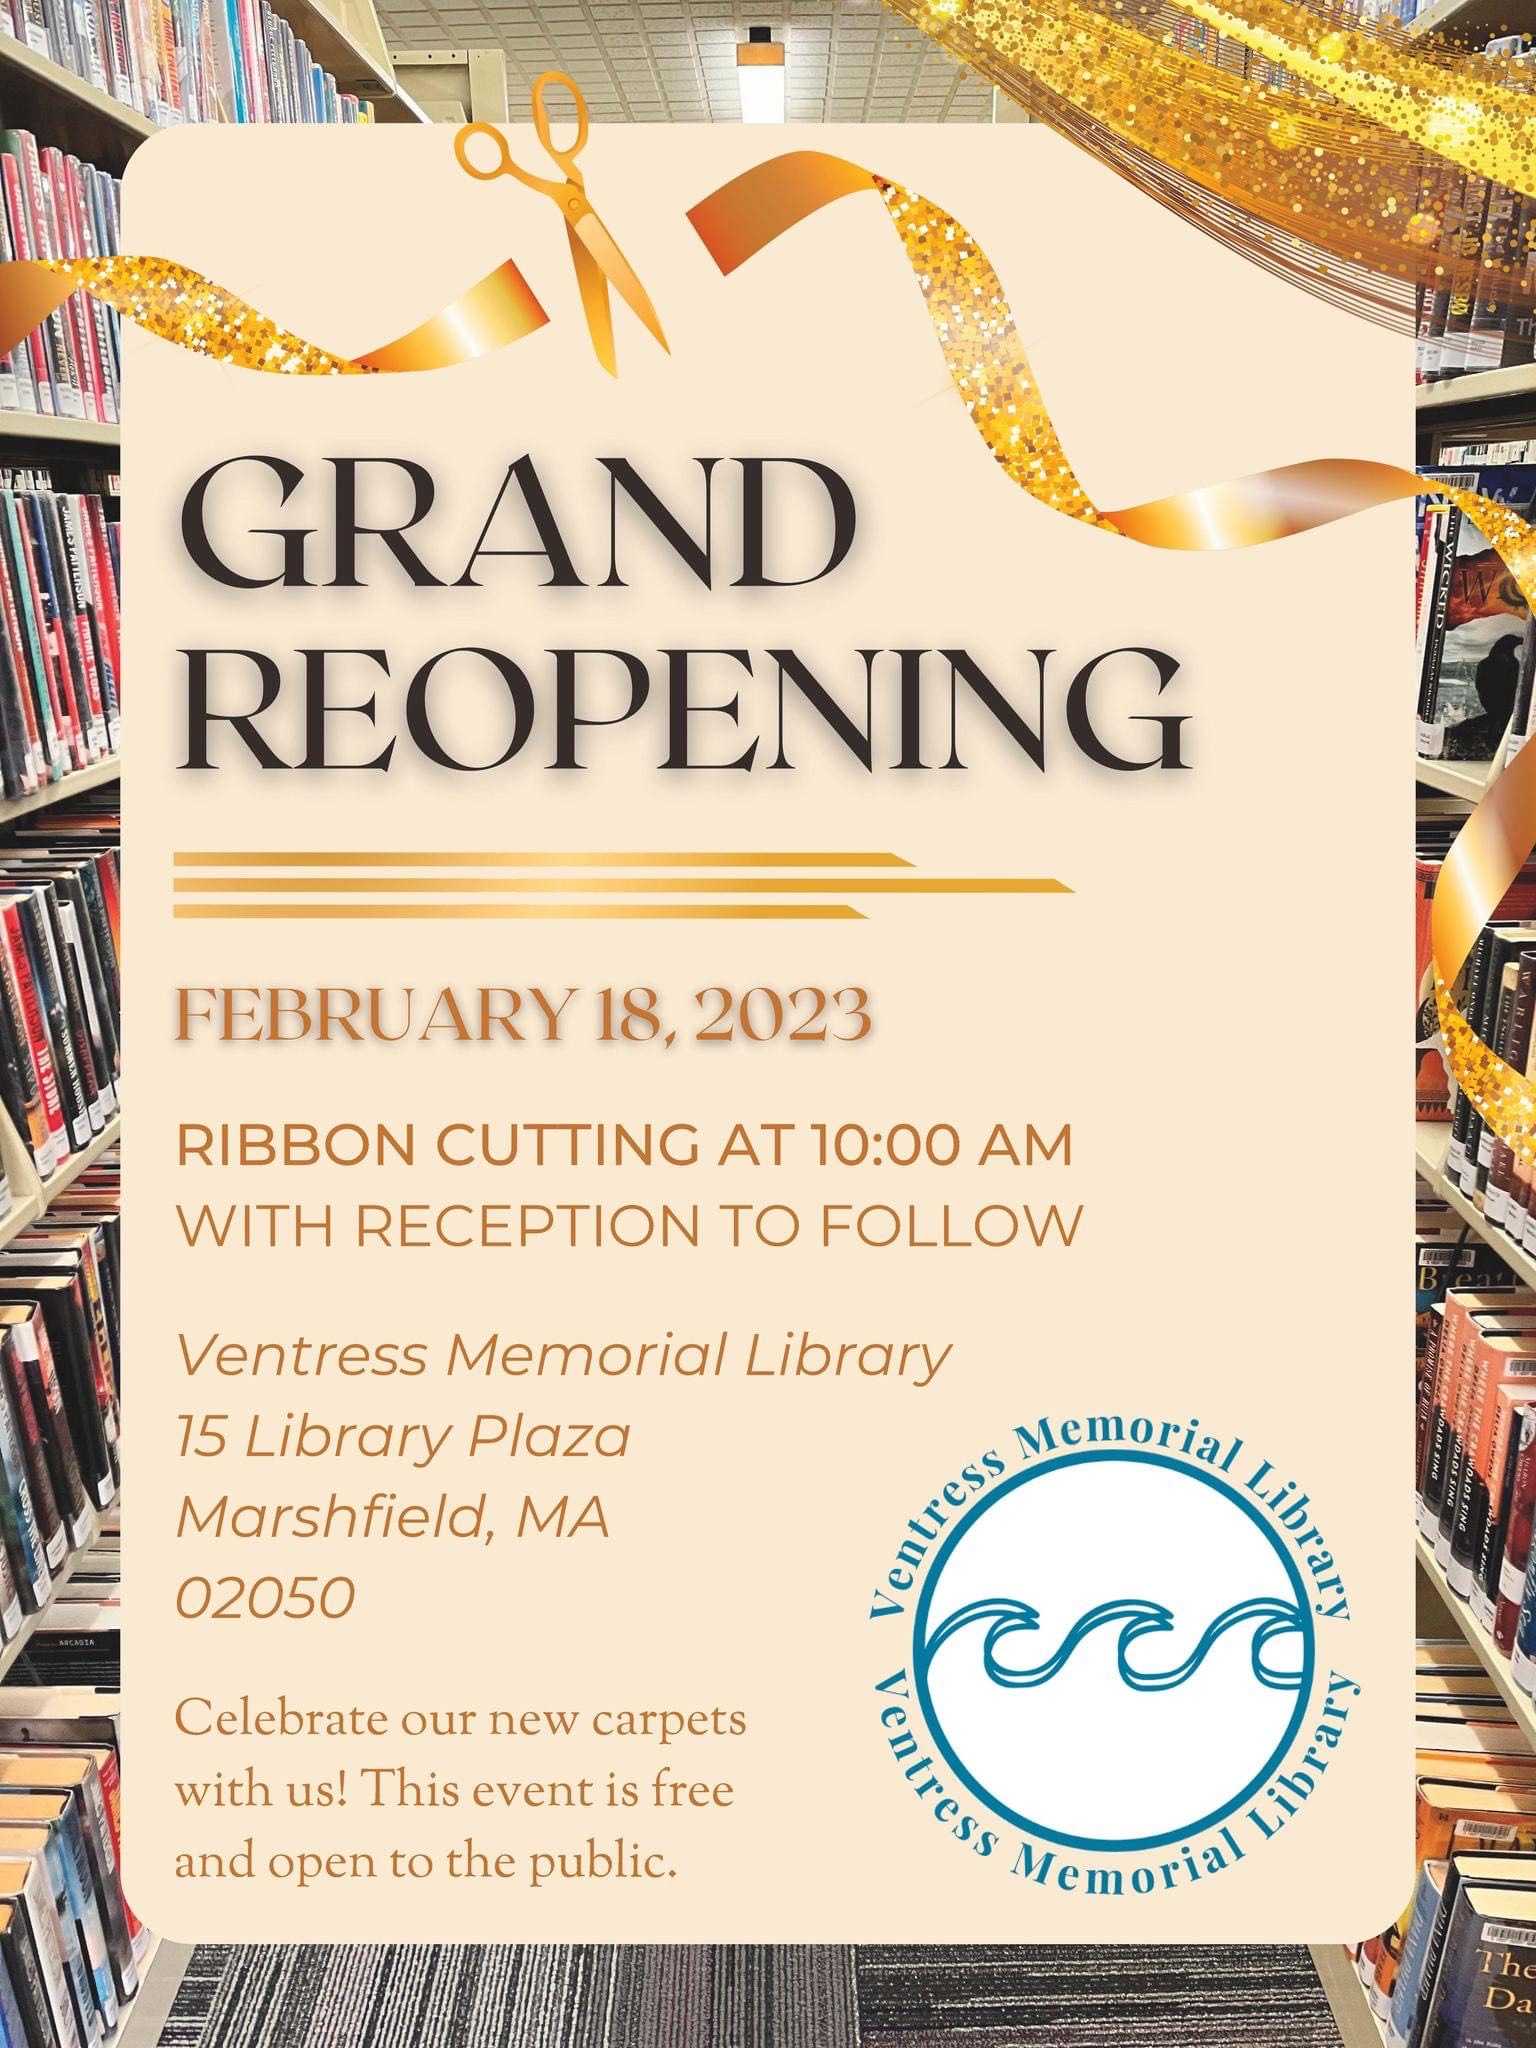 Library reopening